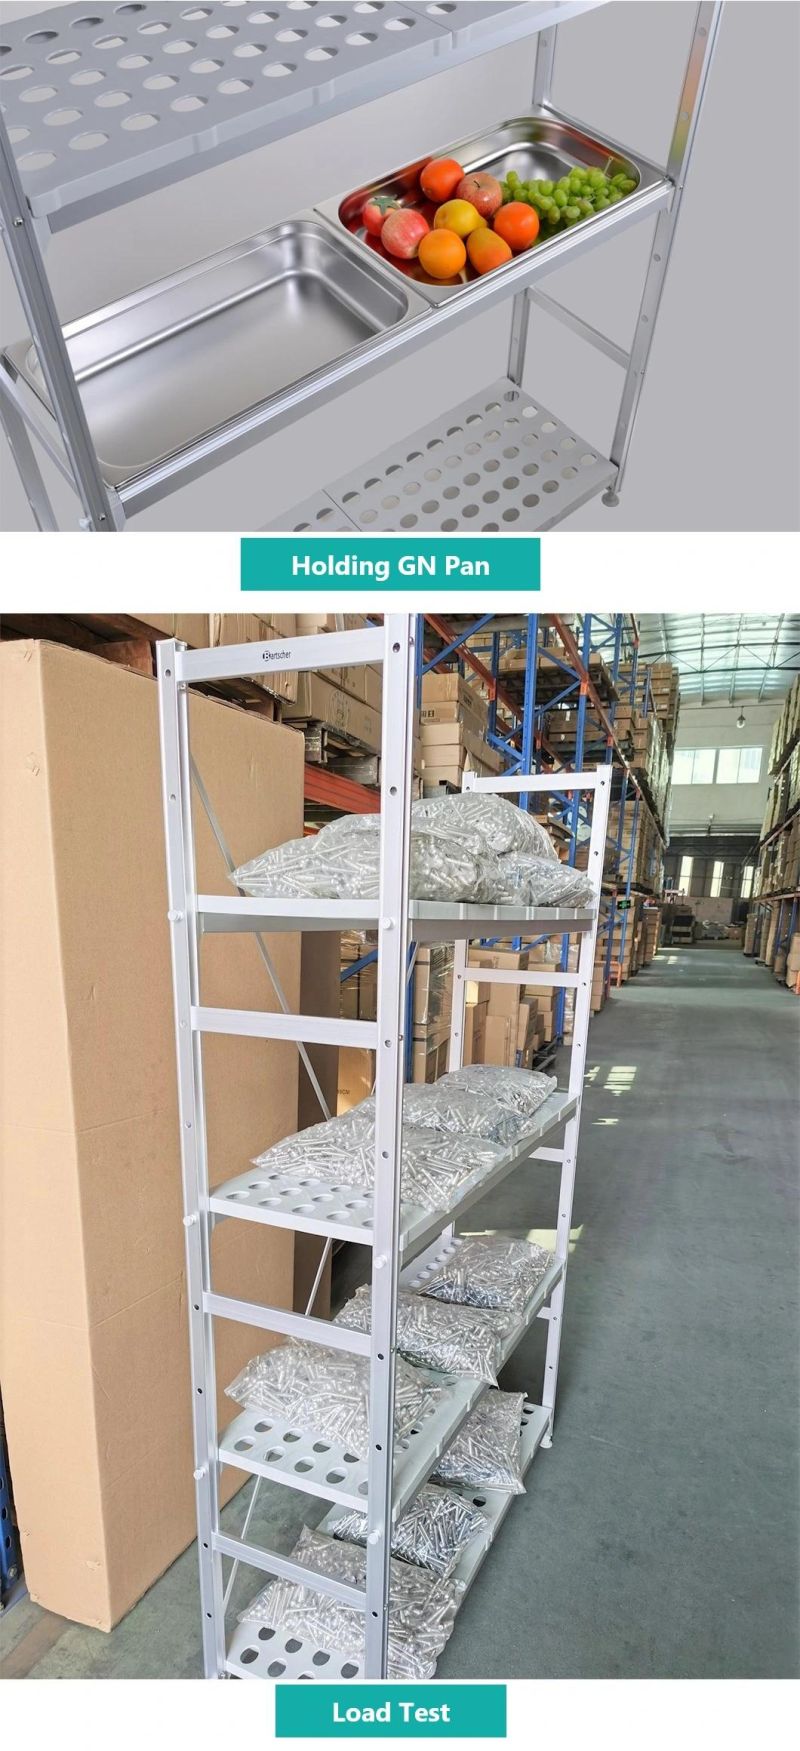 Middle Duty Catering Warehouse Kitchen Storage Rack Cold Room Shelving